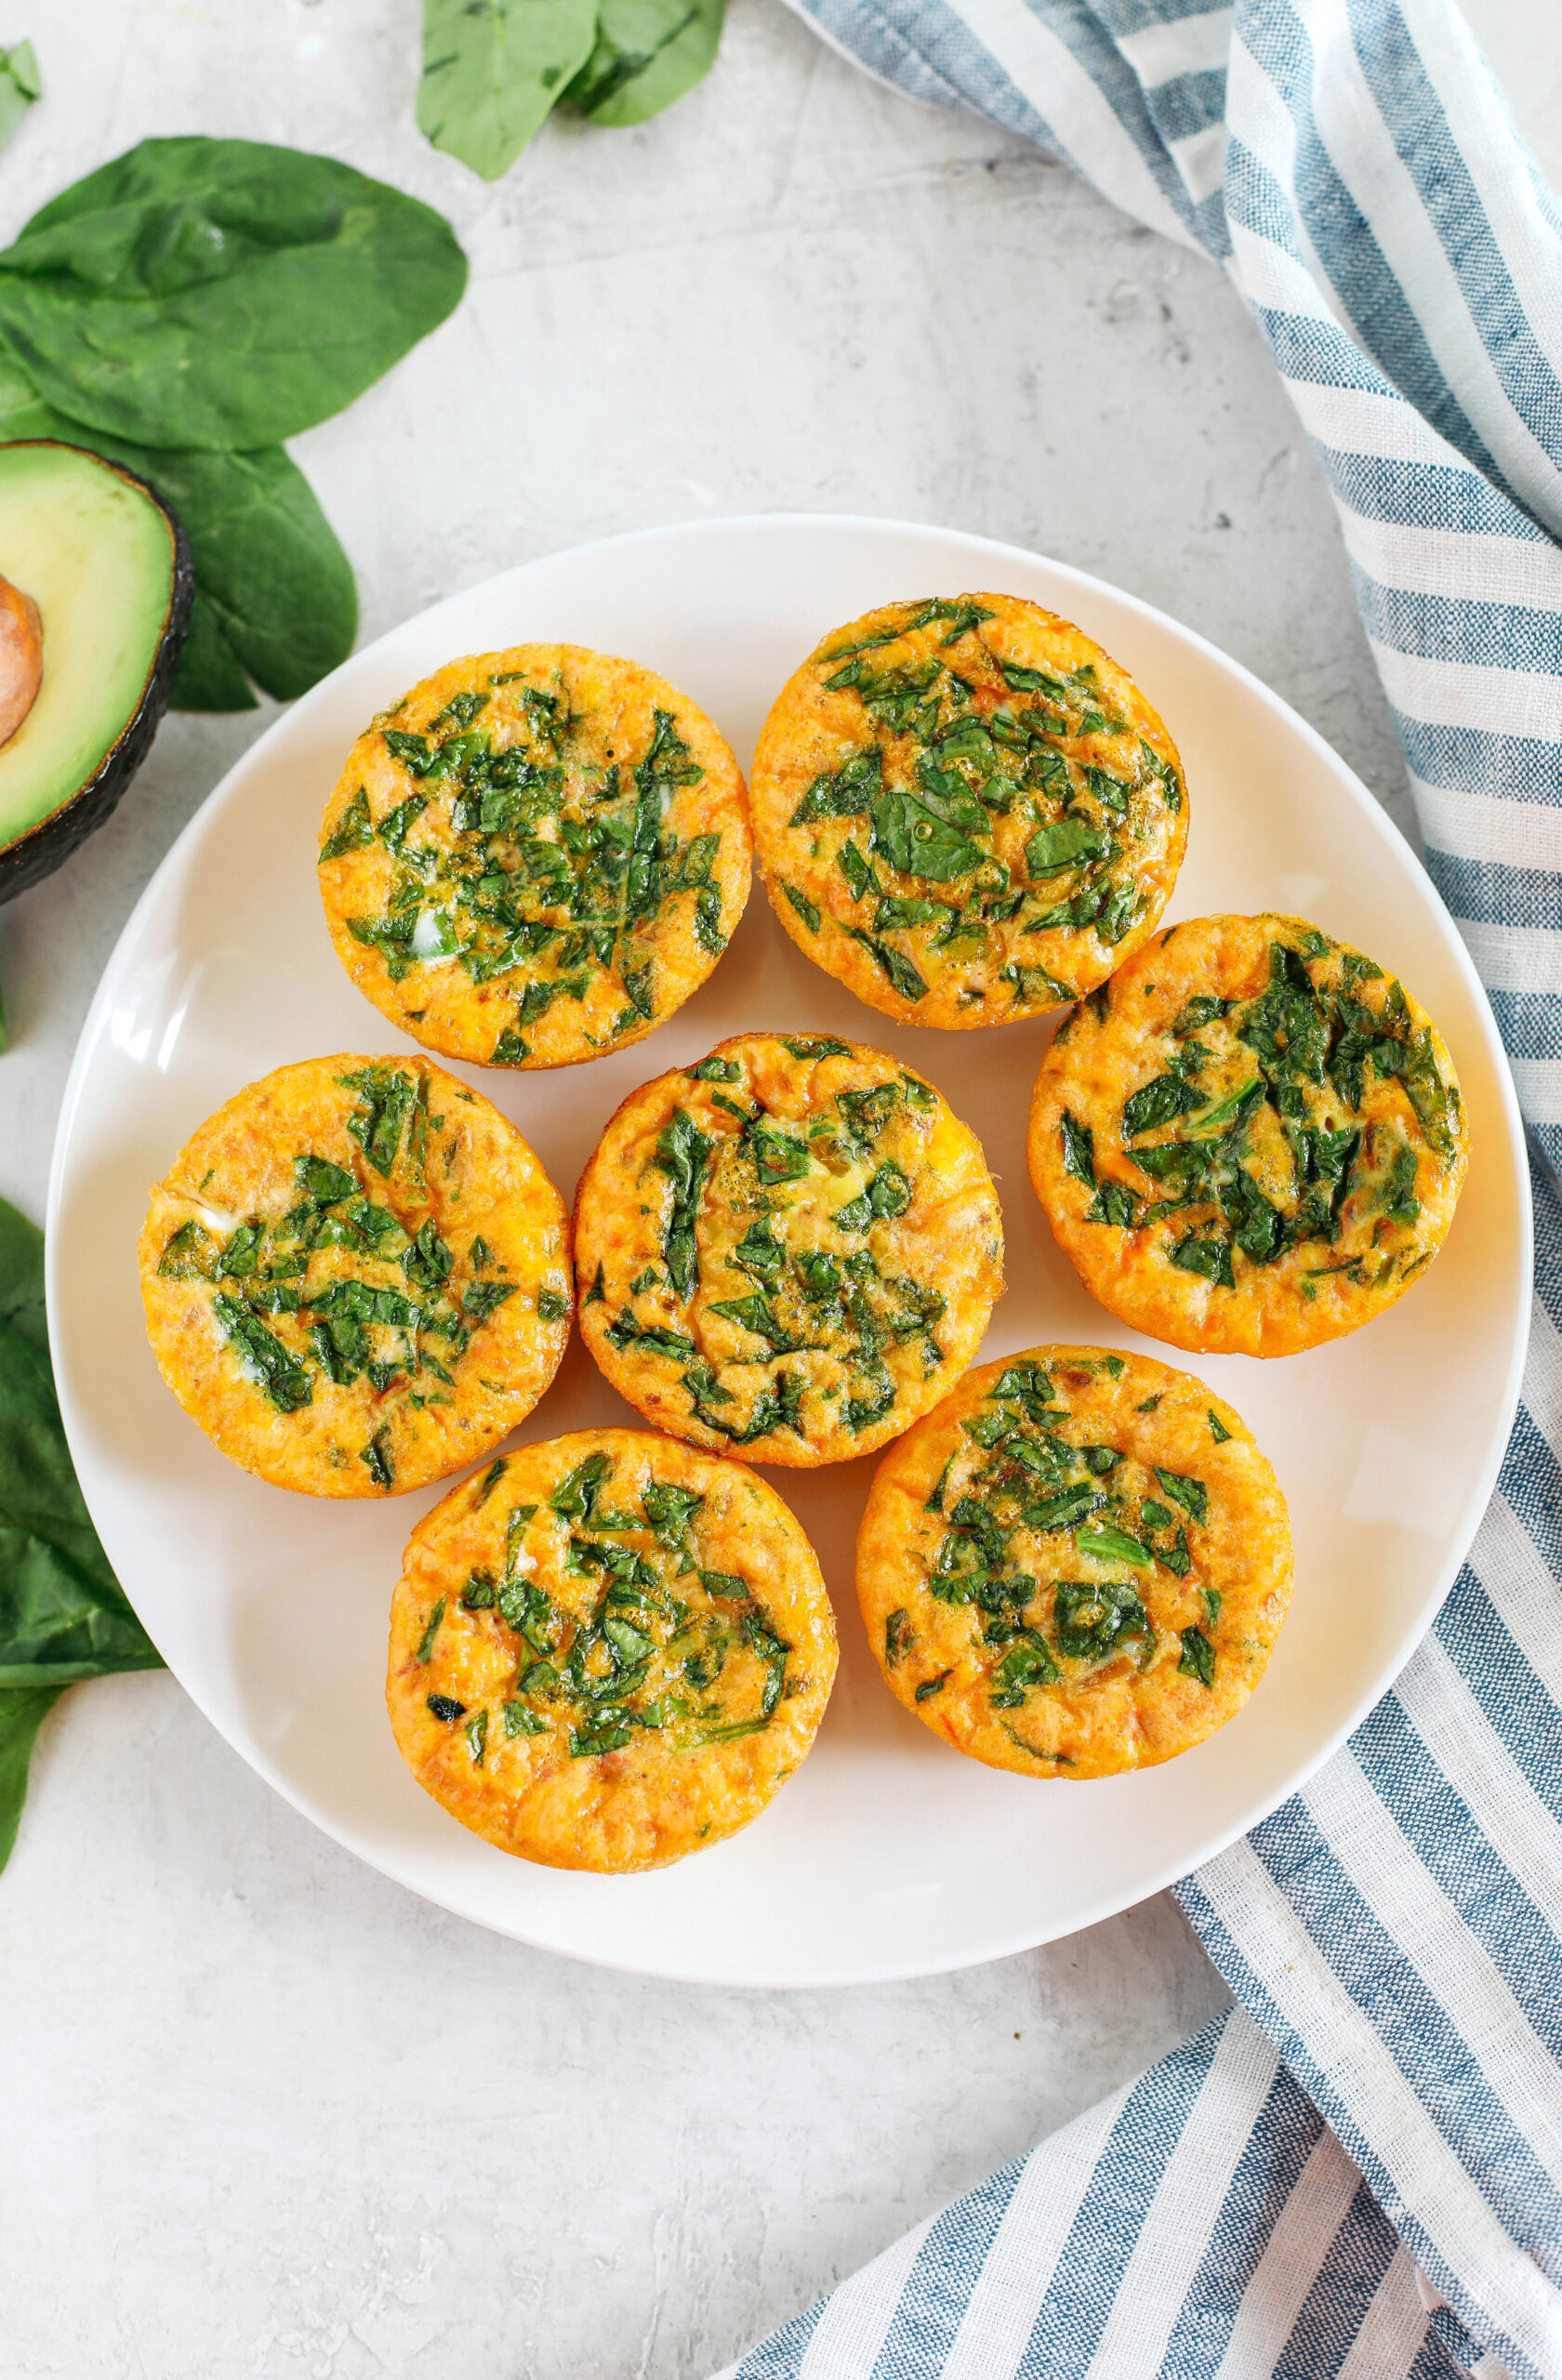 These Cheesy Salsa Egg Muffins make the perfect healthy breakfast that are packed with flavor, simple to make and can easily be grabbed on-the-go!